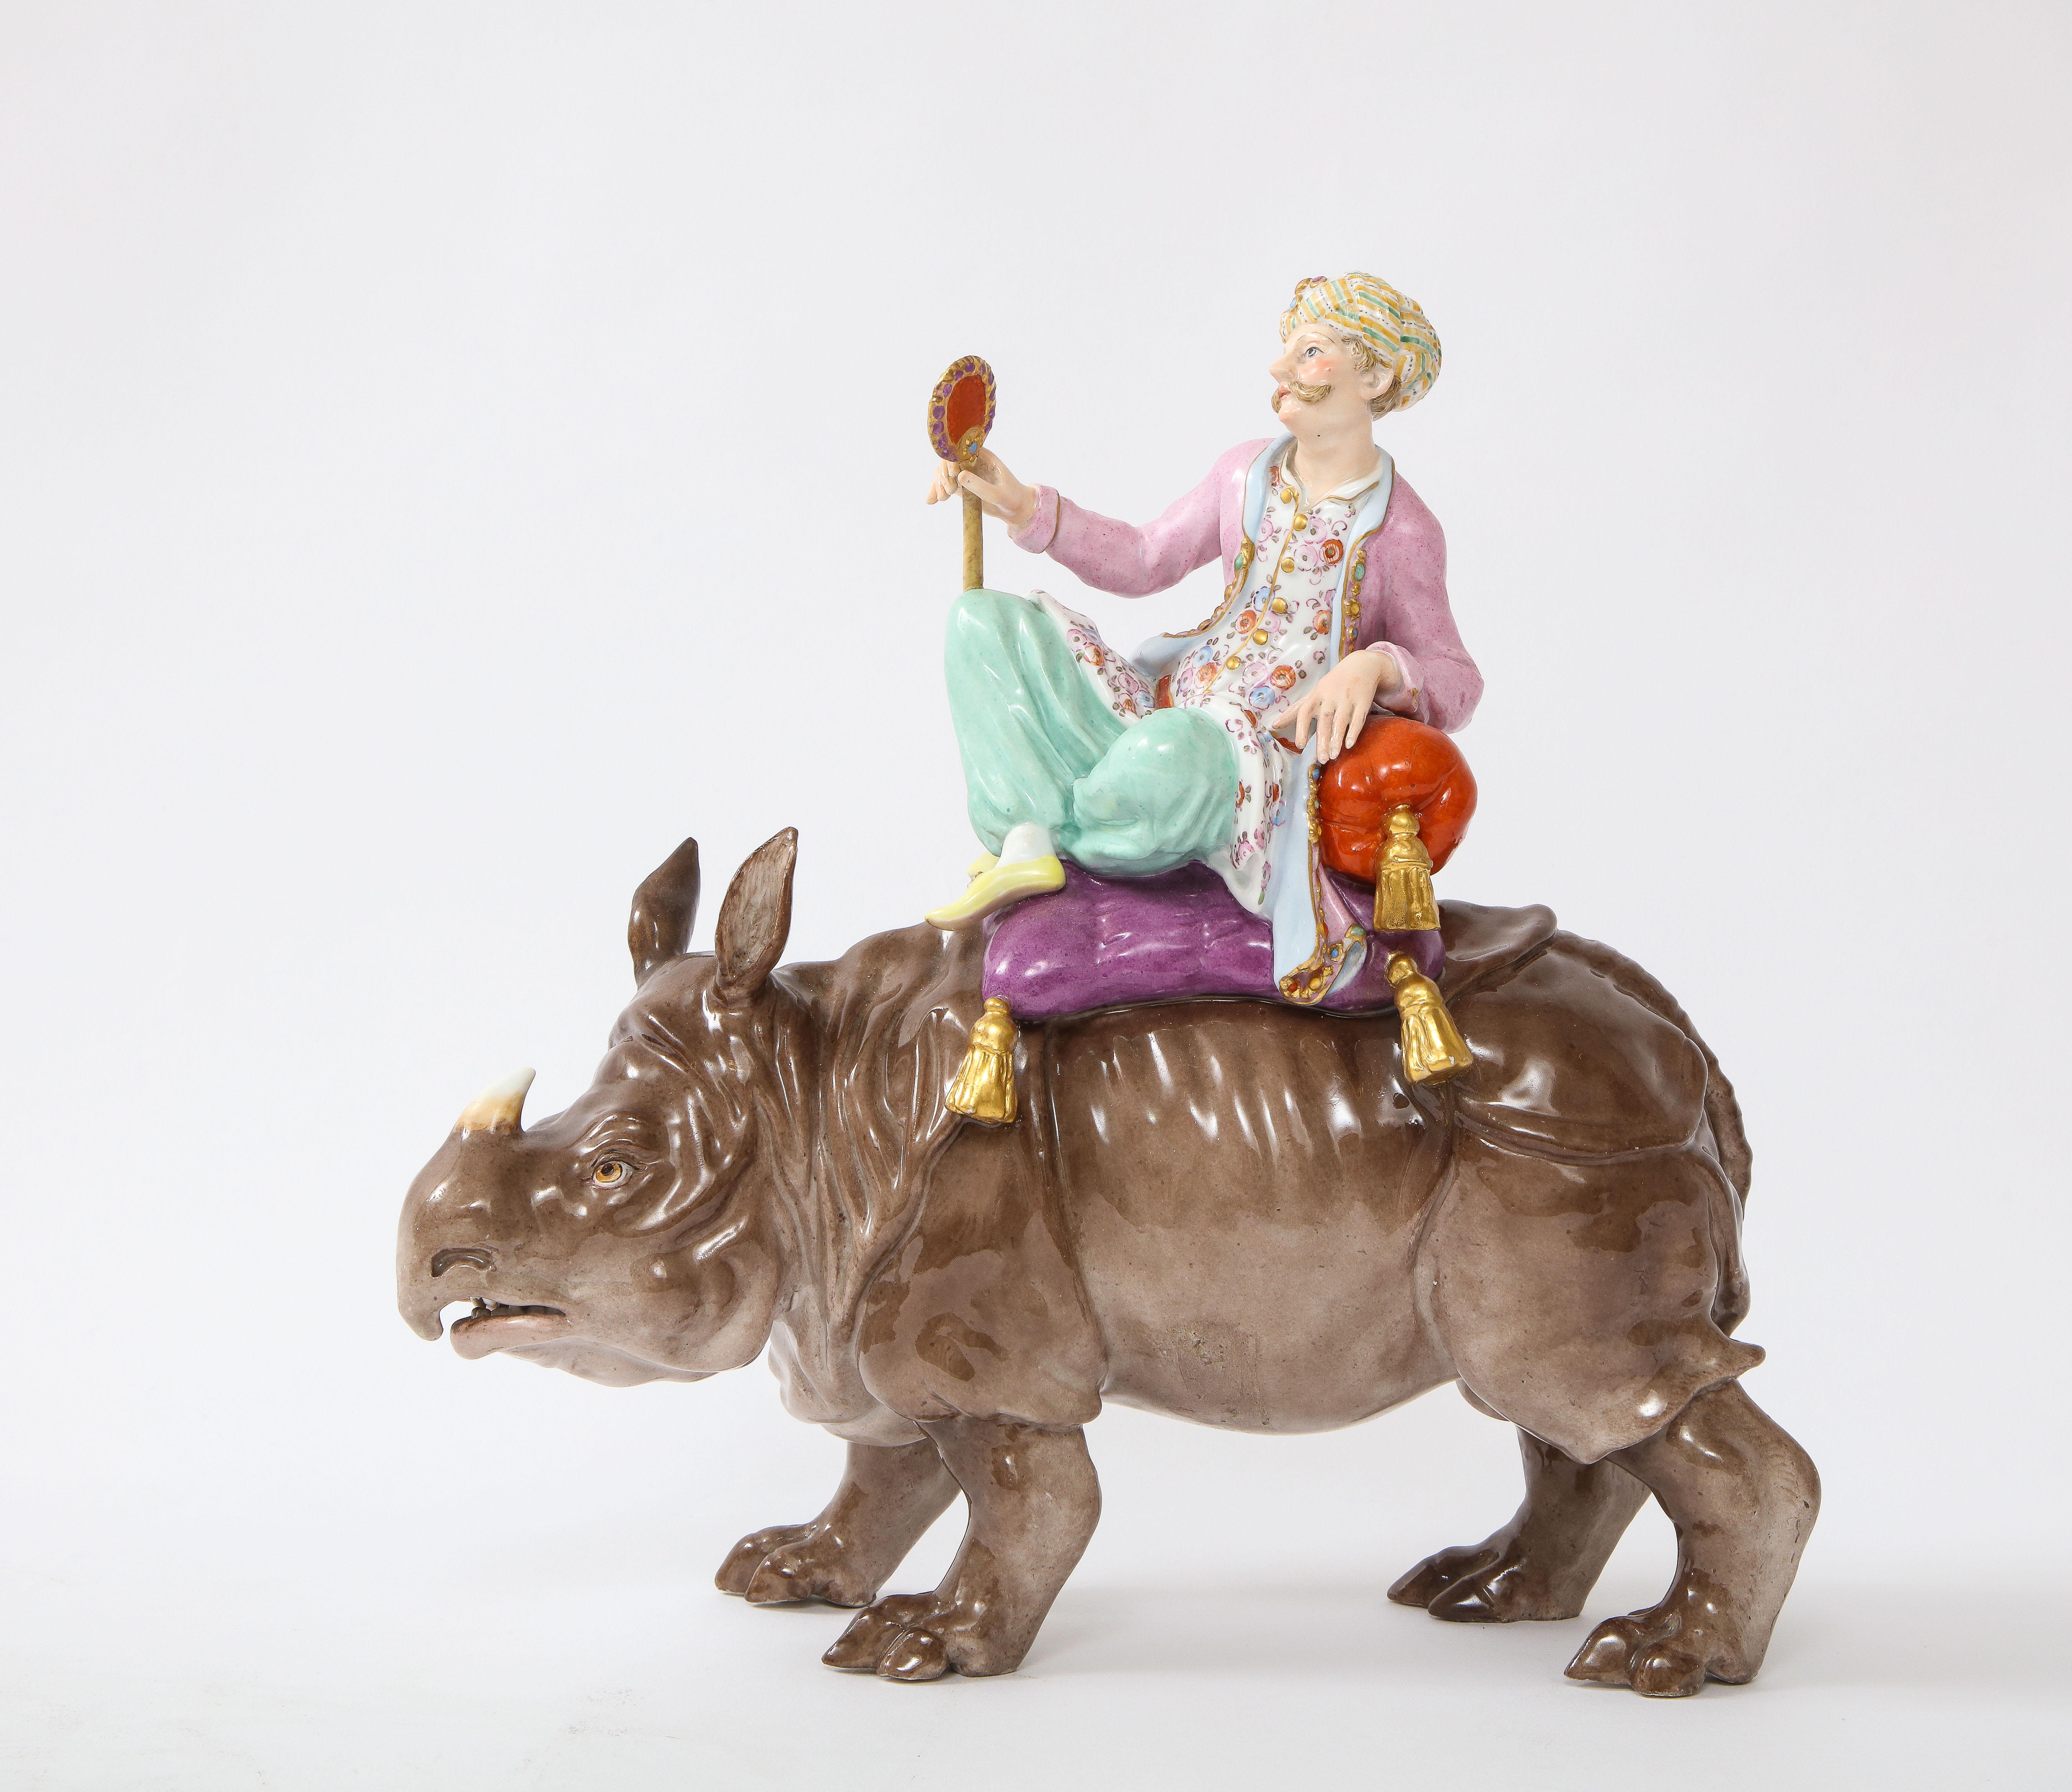 A fantastic 19th century Meissen Porcelain orientalist/Turkish figure of a Malabar Man seated on a rhinoceros. This is a rare and beautiful group made by Meissen in the 1800's of a Malabar, after the original model by J.J. KÄNDLER and Friedrich